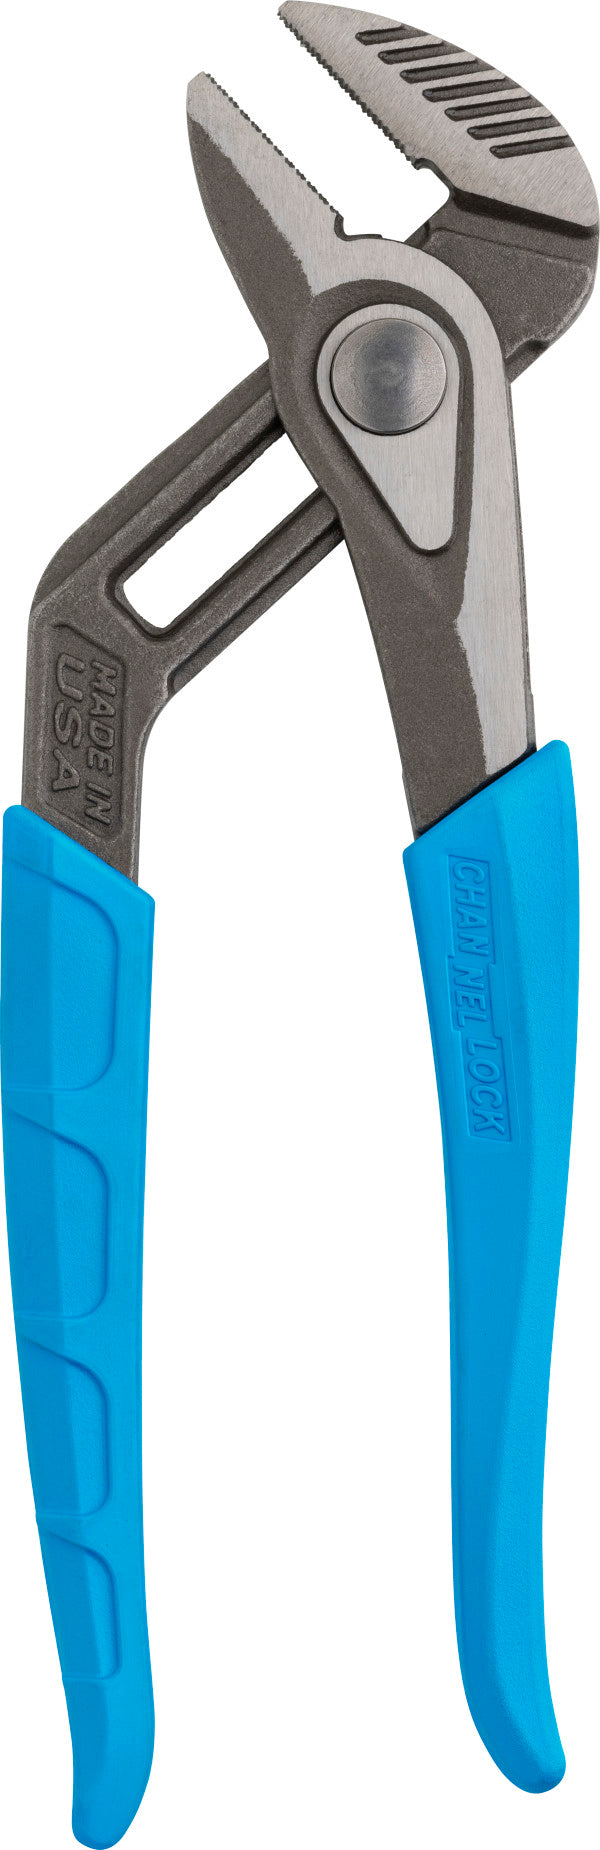 ChannelLock SpeedGrip Push Button Tongue & Groove Pliers